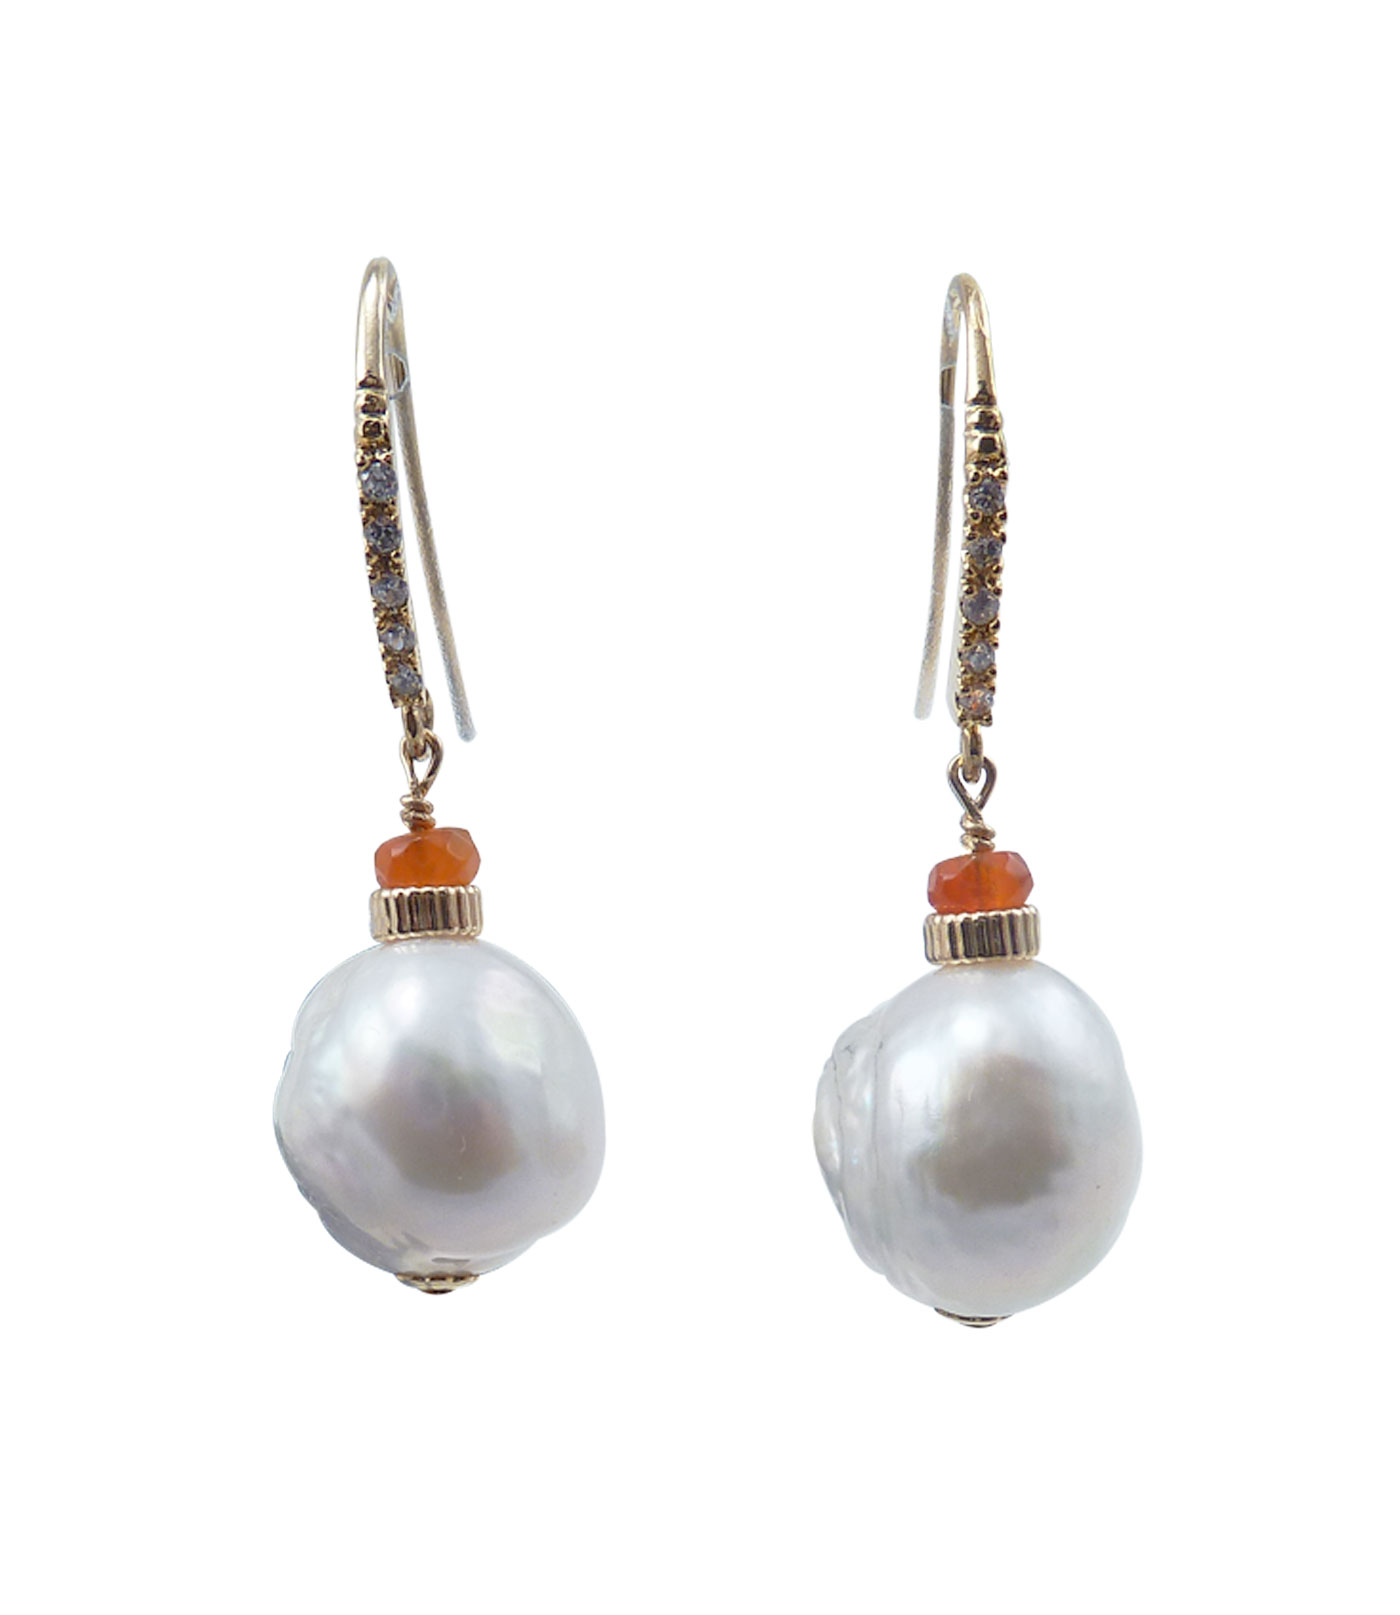 Designer pearl earrings agate accent for modern a successful woman